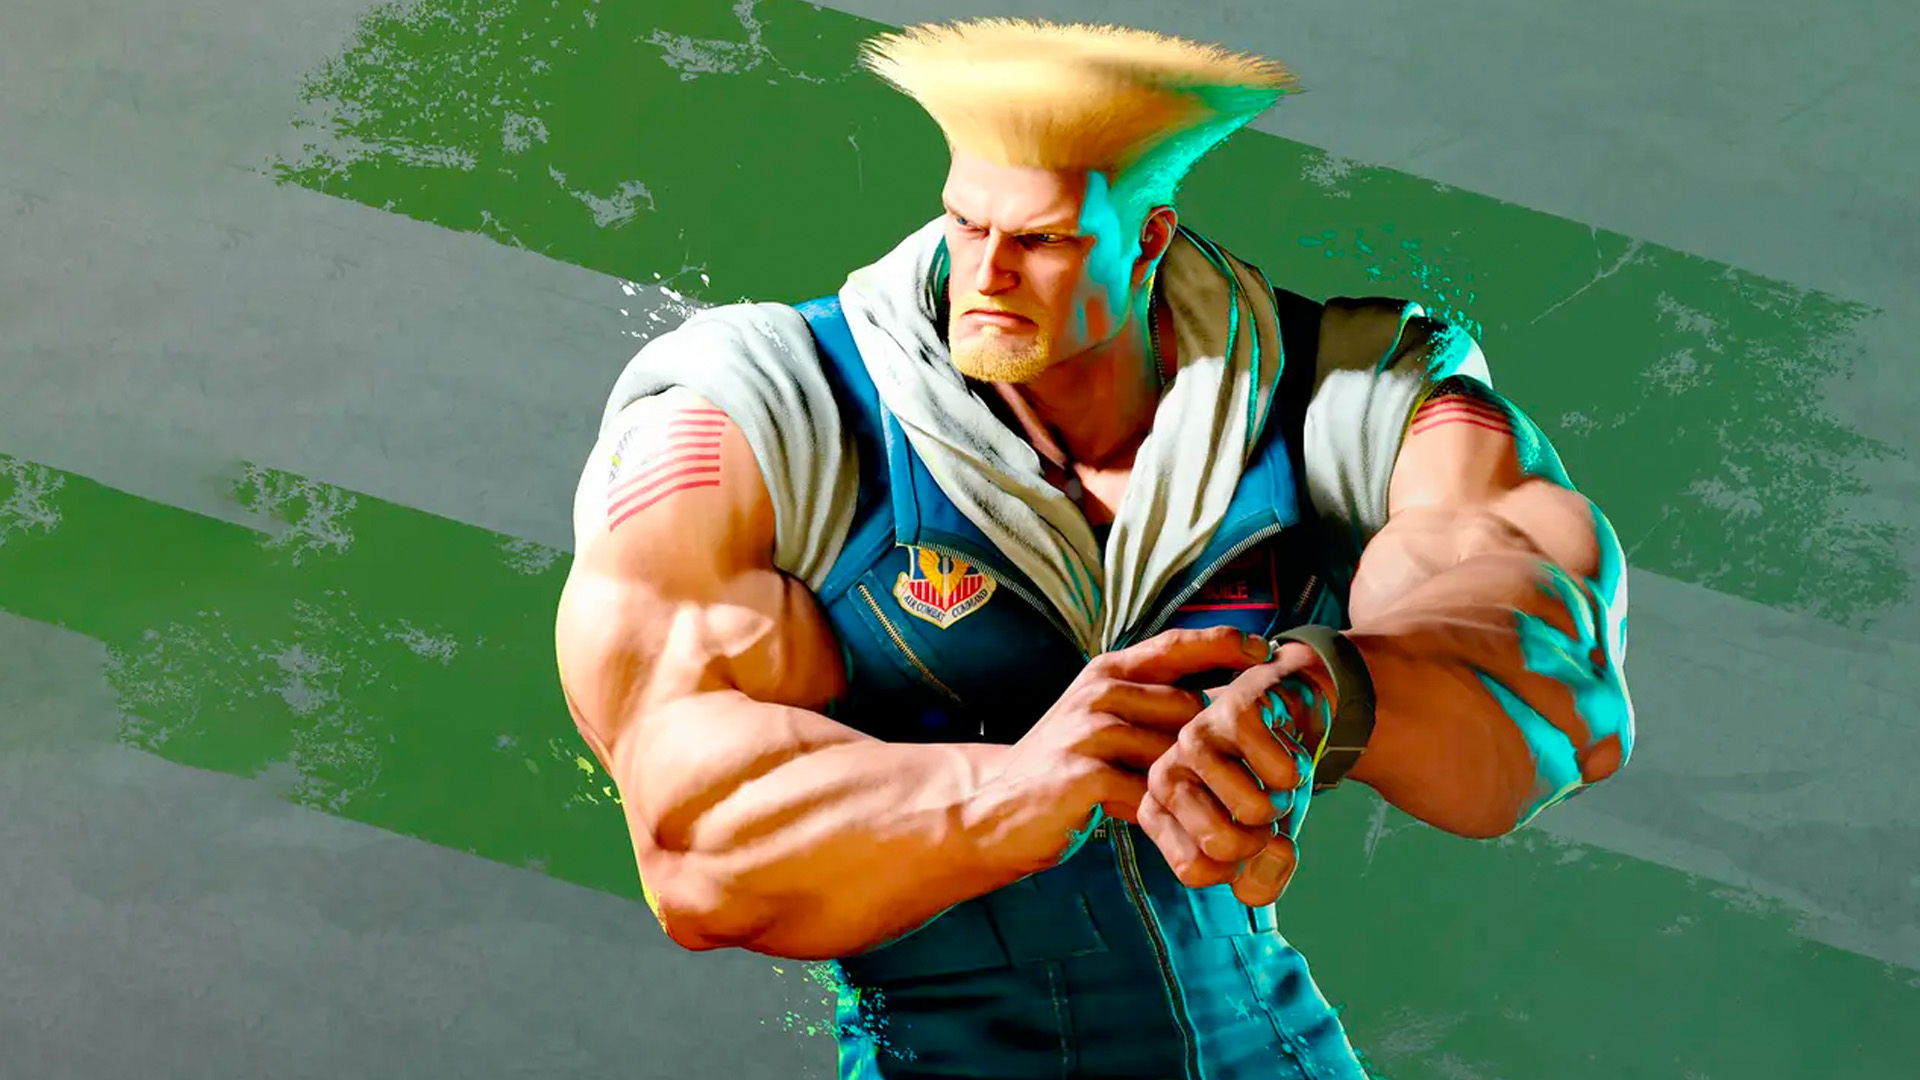 Street Fighter 6's Guile is a mix of new and old school